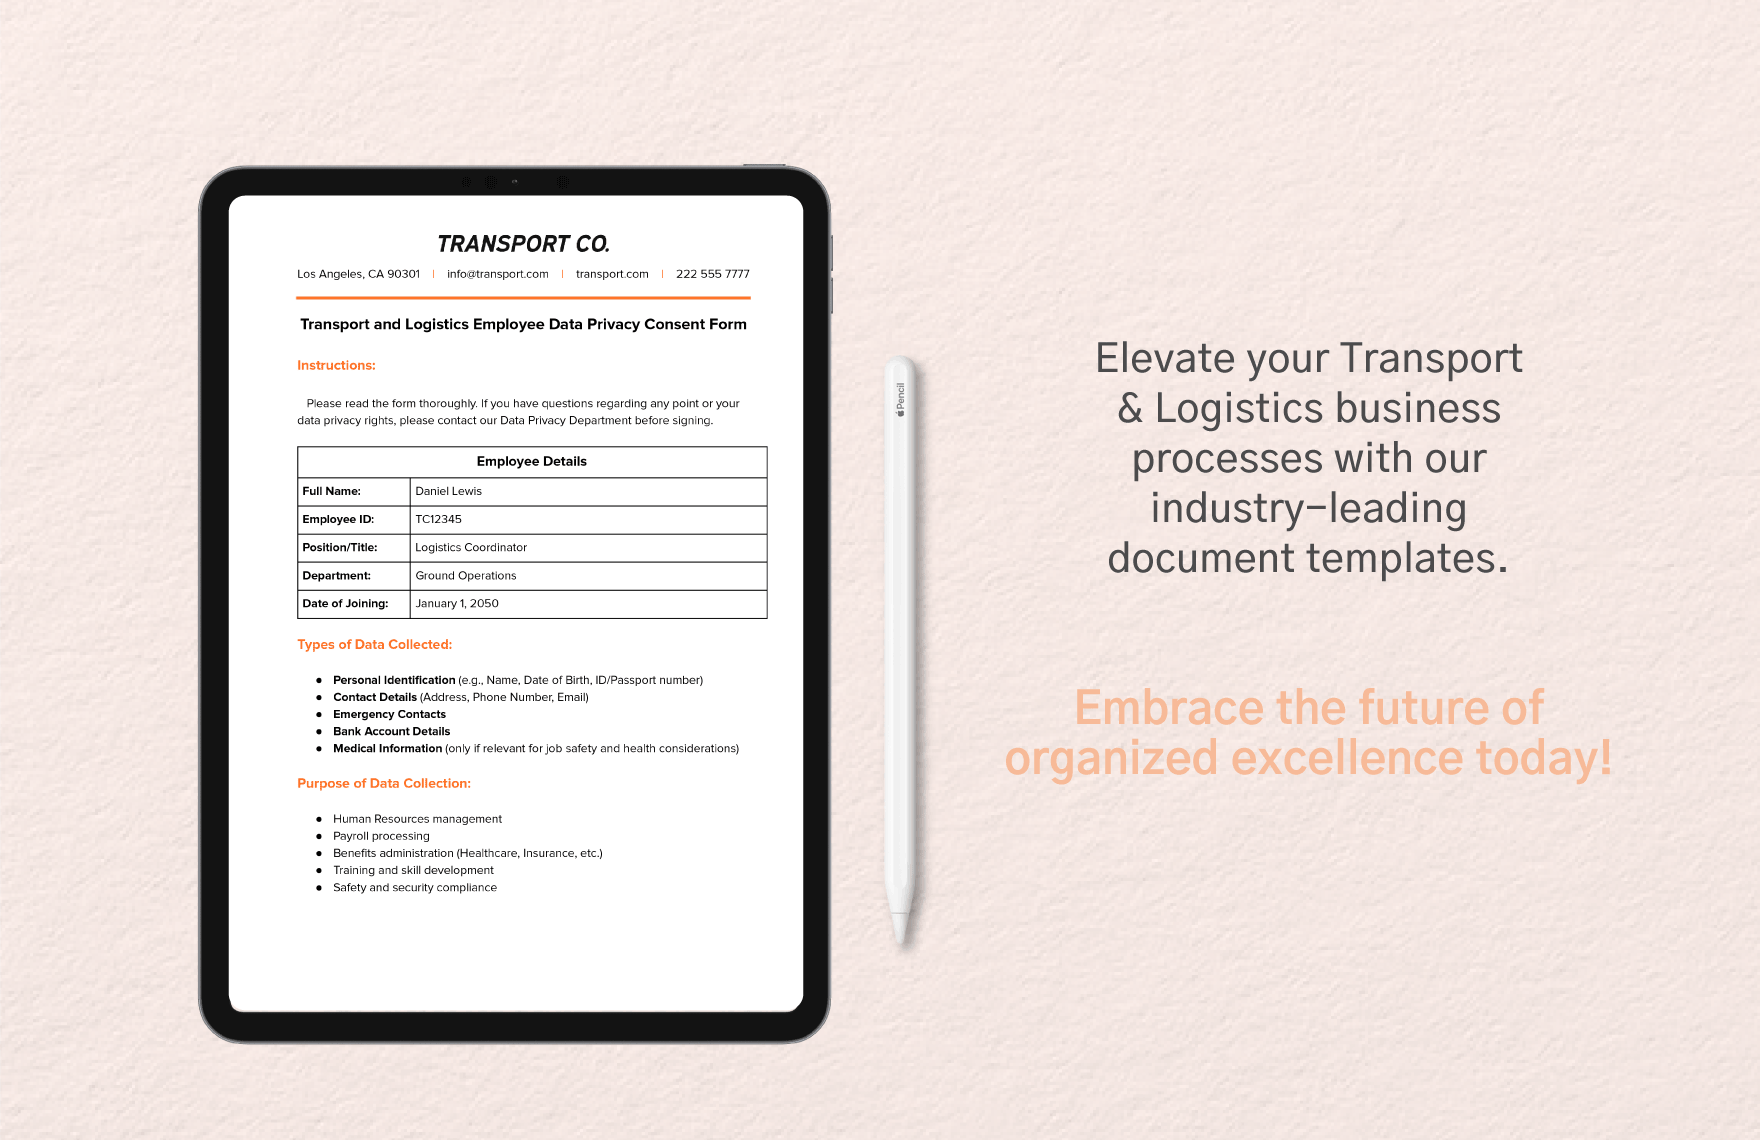 Transport and Logistics Employee Data Privacy Consent Form Template